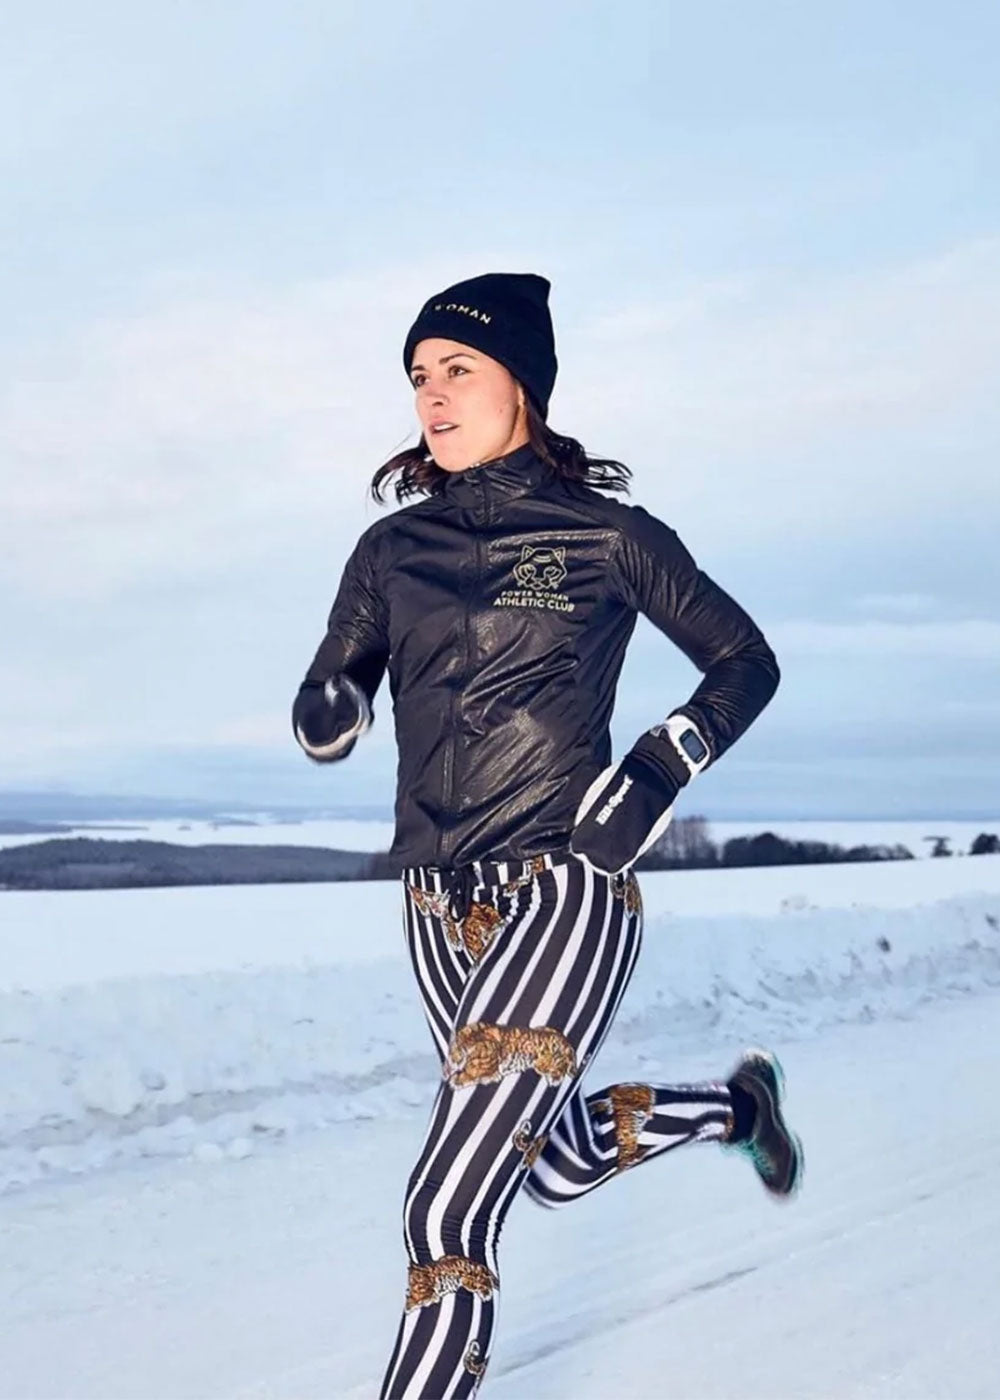 Top reasons why you should start winter running